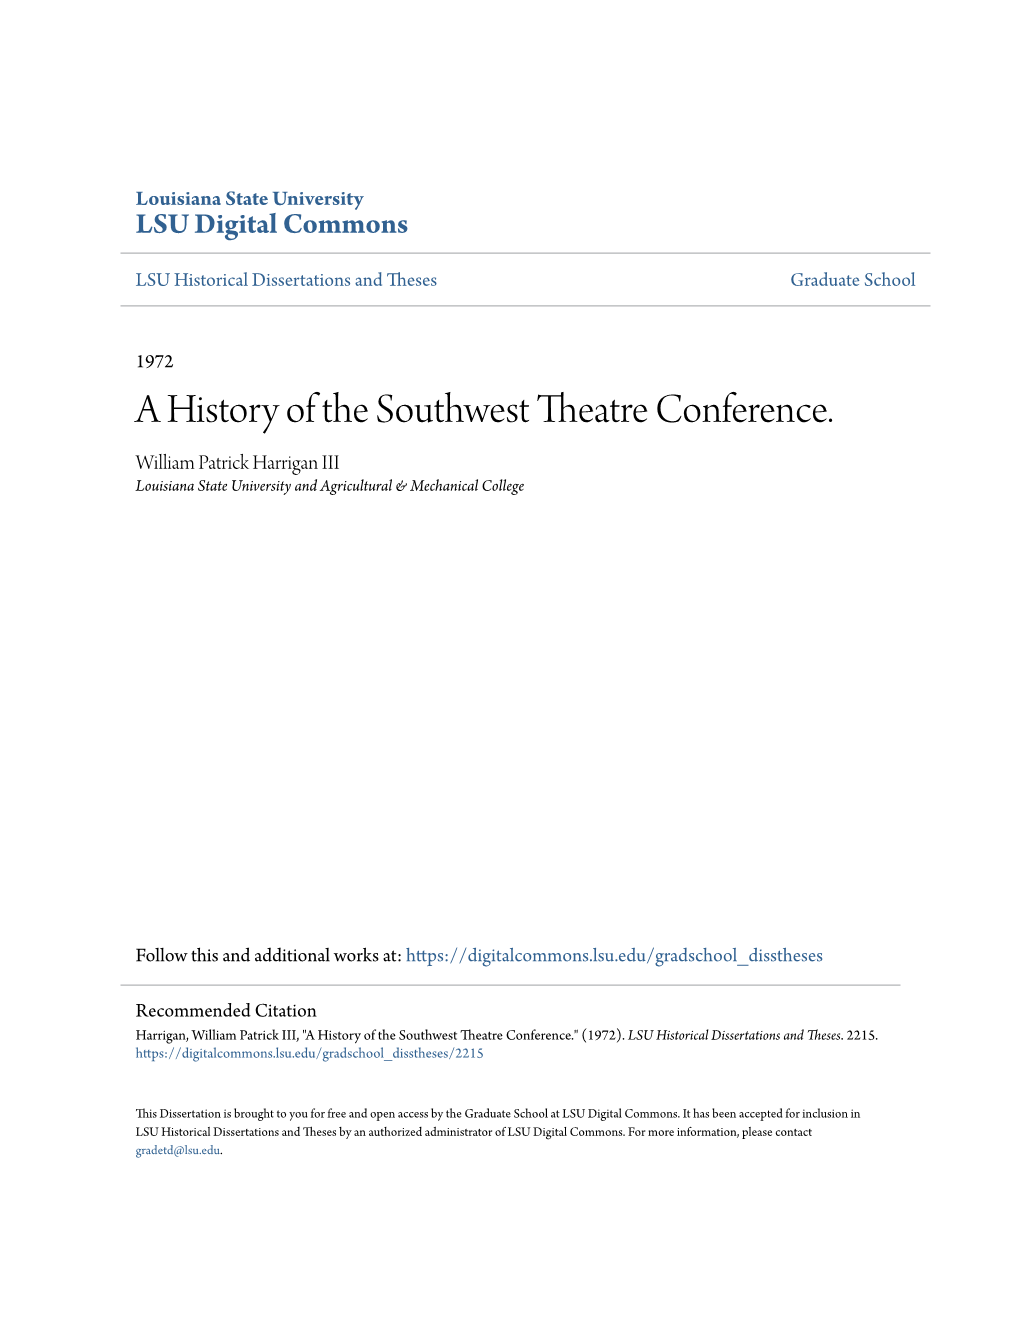 A History of the Southwest Theatre Conference. William Patrick Harrigan III Louisiana State University and Agricultural & Mechanical College